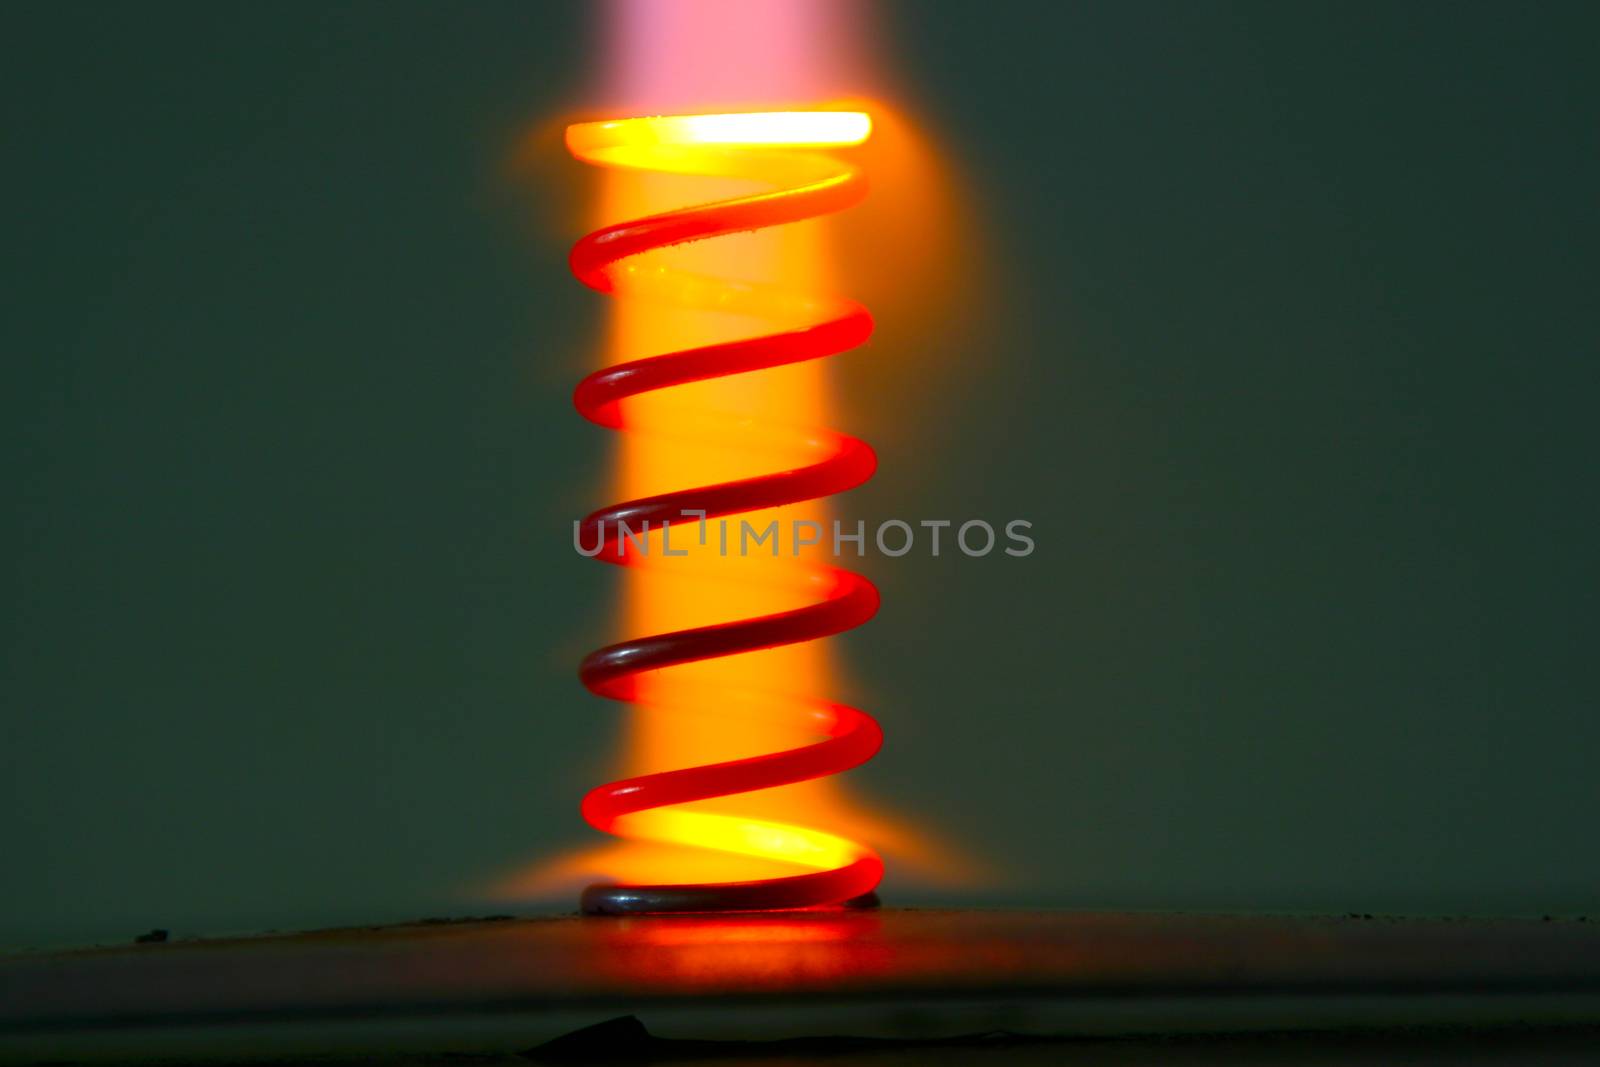 Heating the coil spring with hot gas flame. Hot iron turned red and yellow.